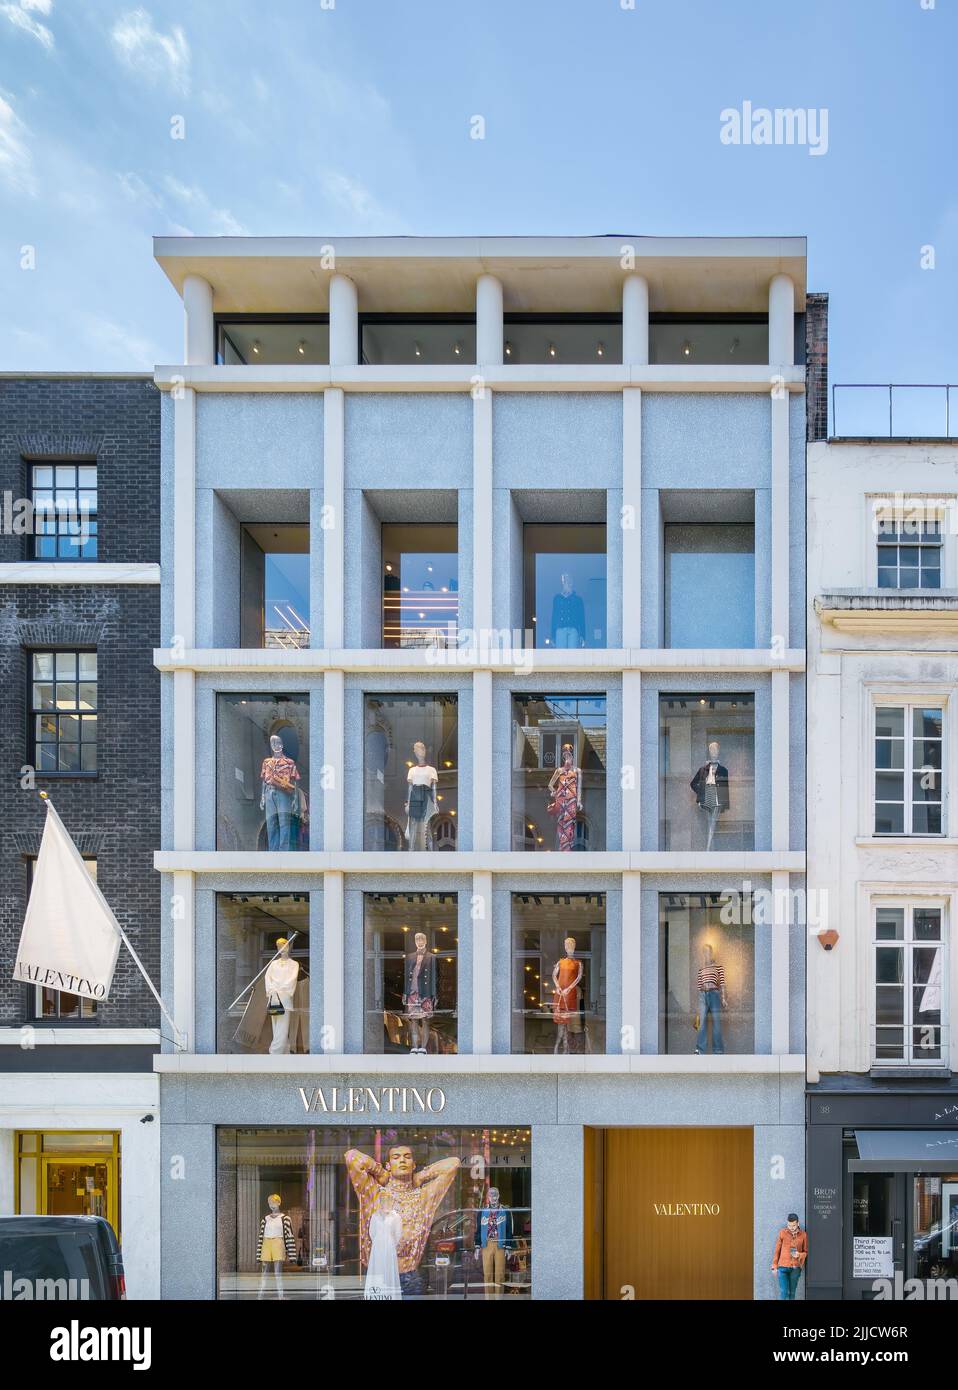 London, England, UK - Valentino clothes shop by David Chipperfield Architects Stock Photo